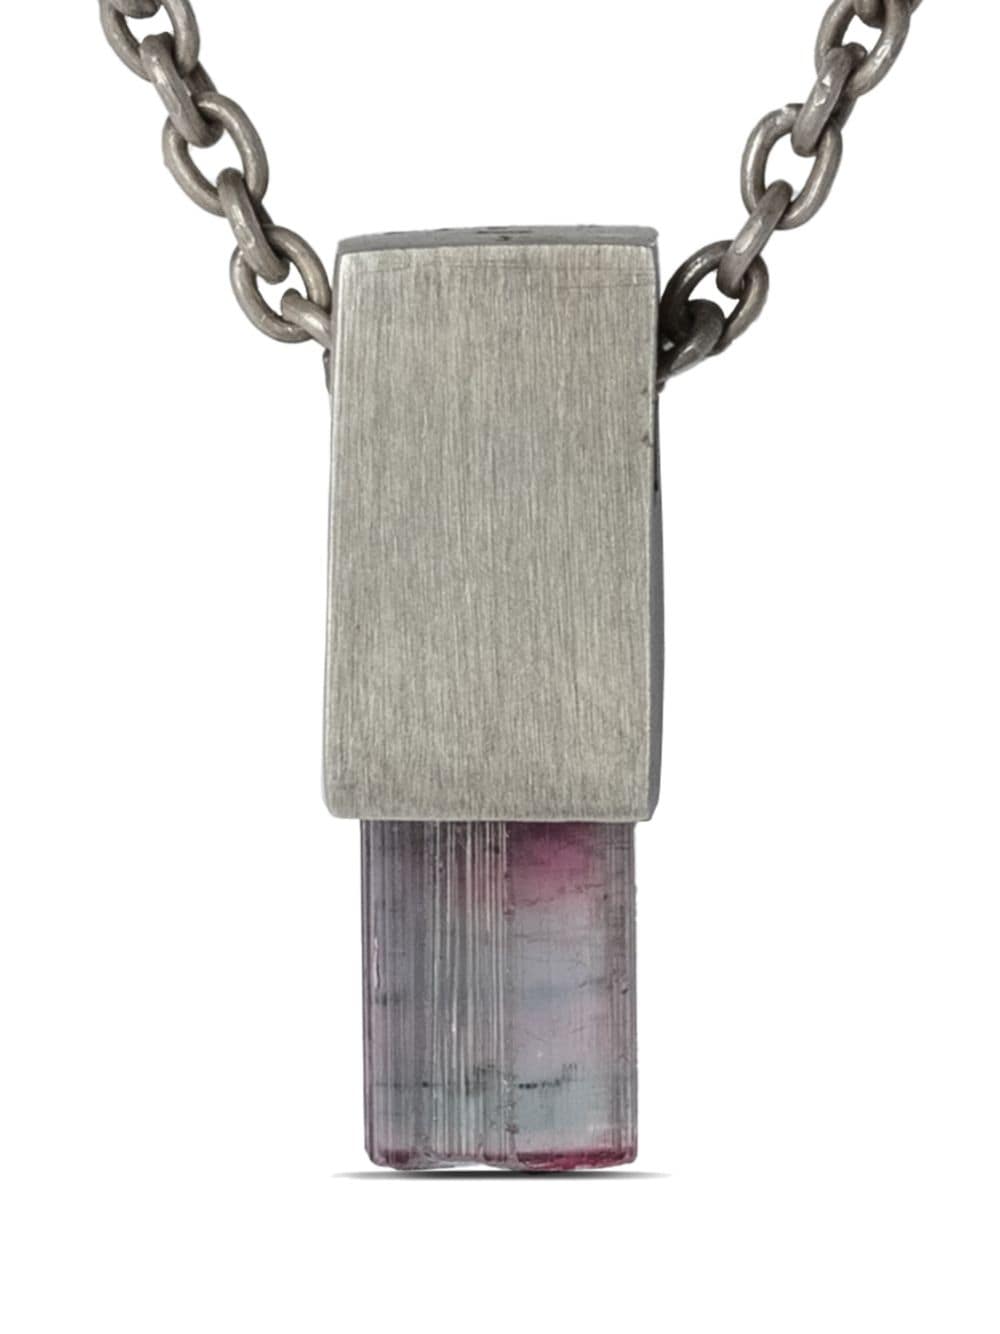 Parts Of Four Talisman Cuboid Rubellite Necklace In Silver